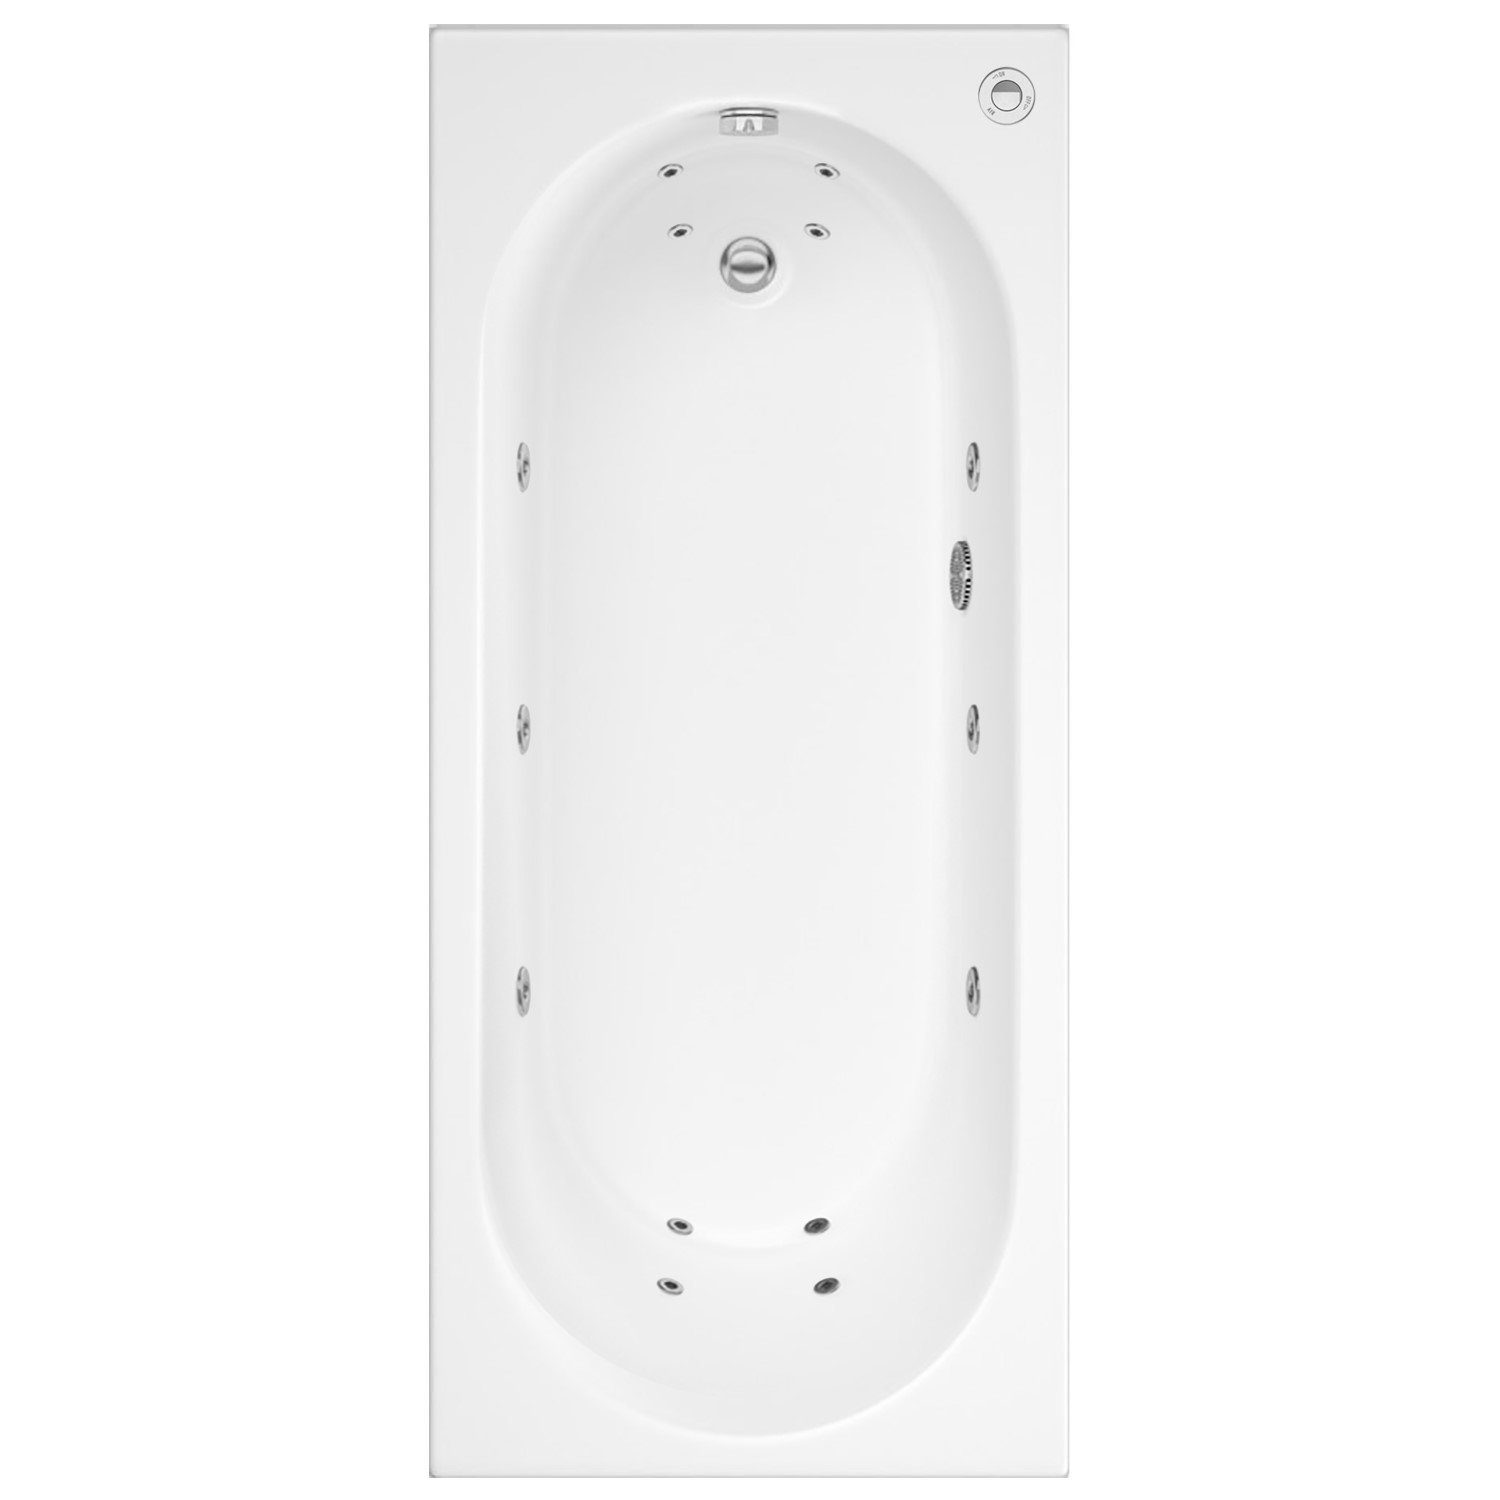 Alton Single Ended Bath with 14 Jet Whirlpool System - 1800 x 800mm